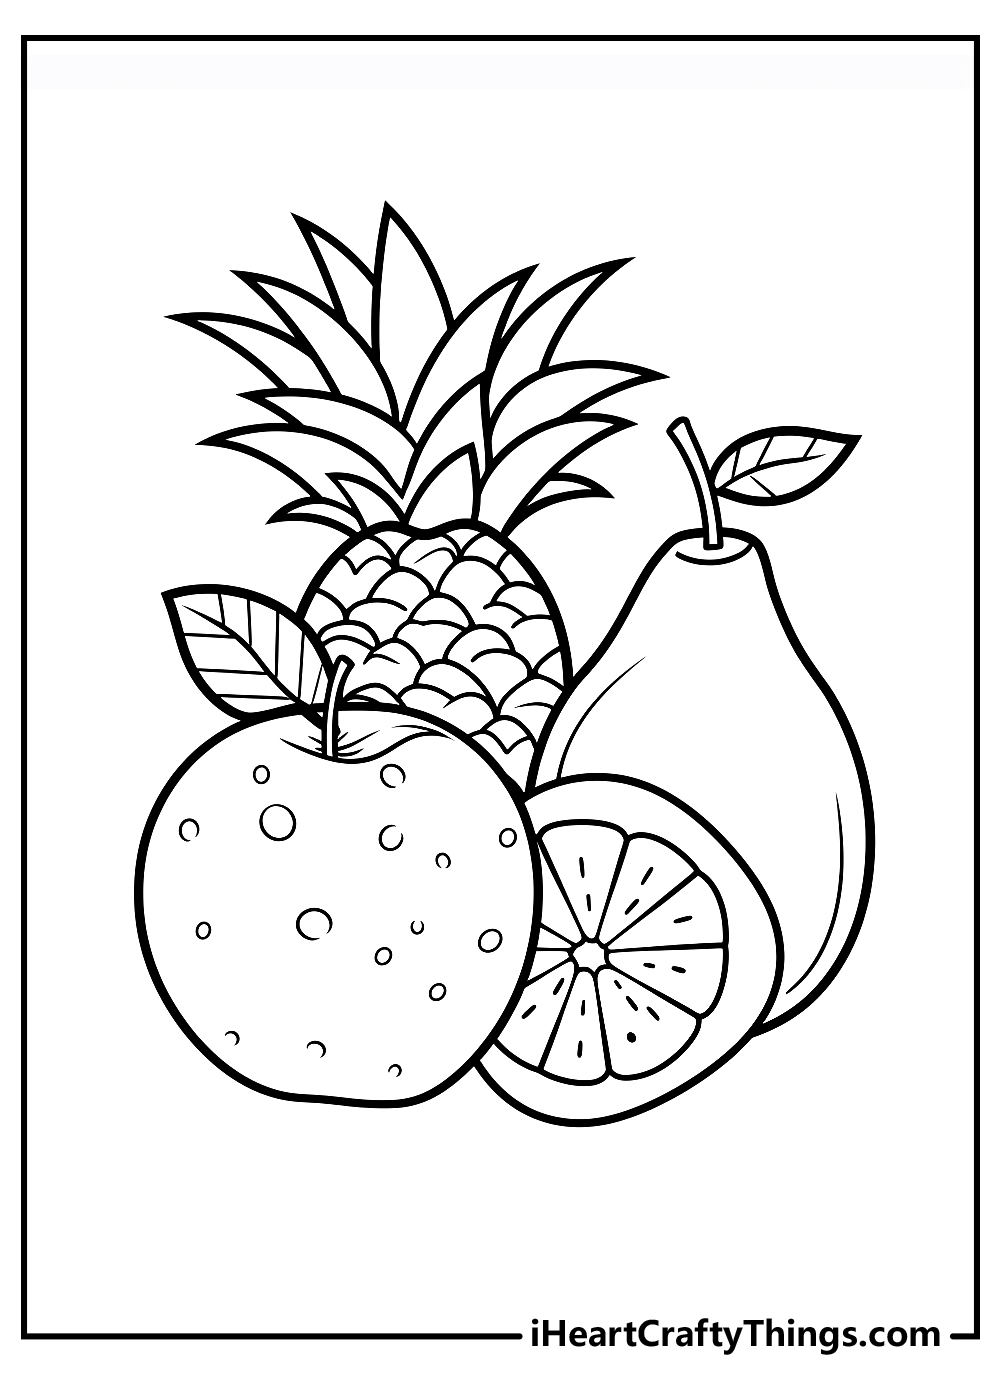 Fruit Basket Coloring Pages Printable for Free Download